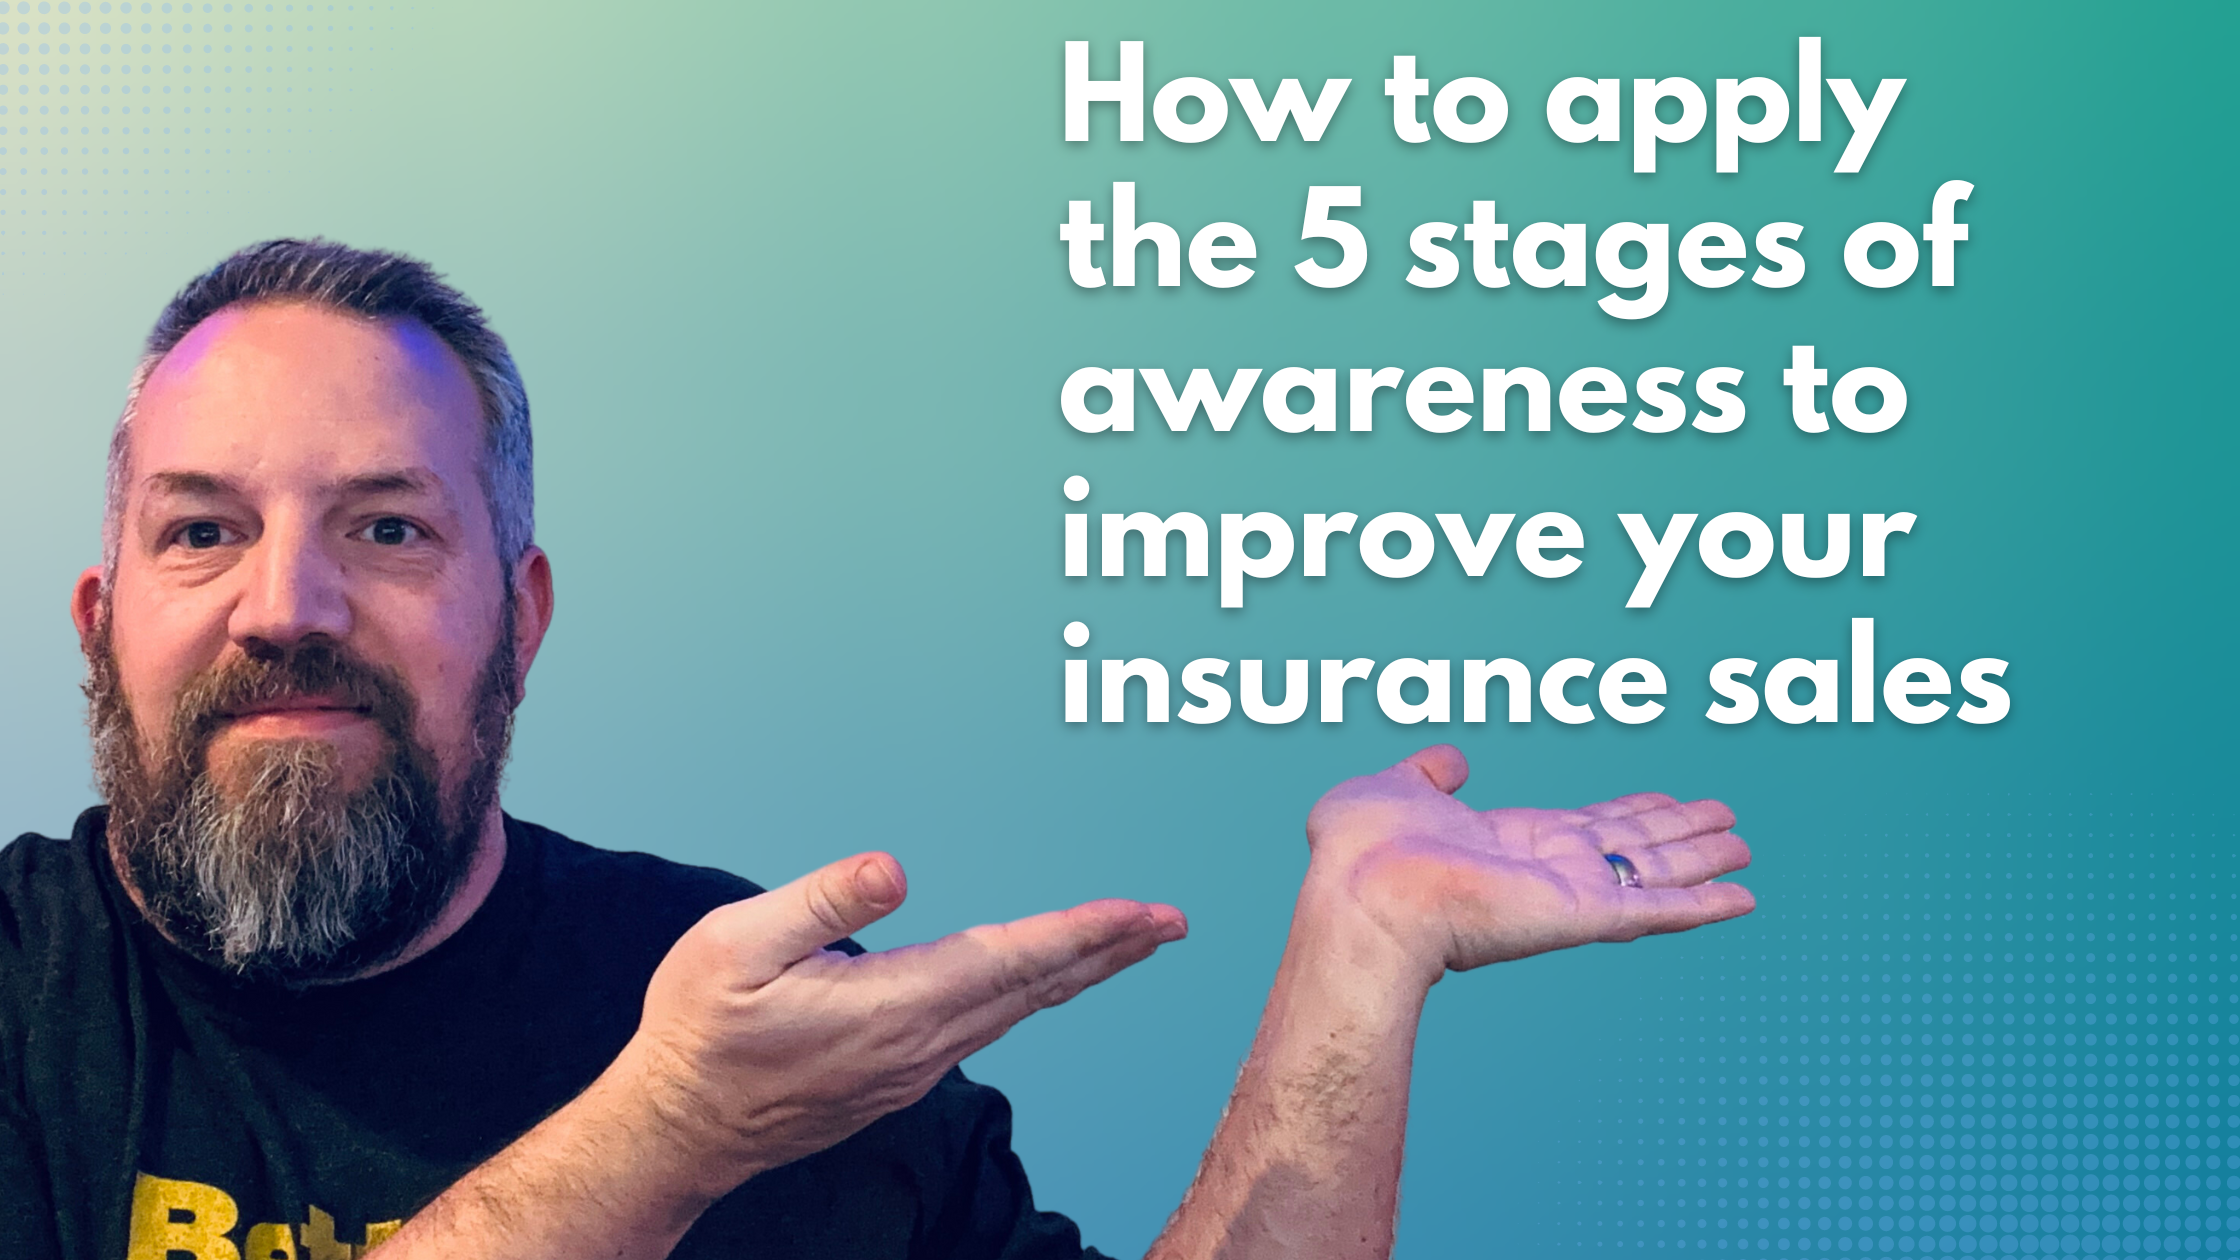 How to apply the 5 stages of awareness to improve your insurance sales